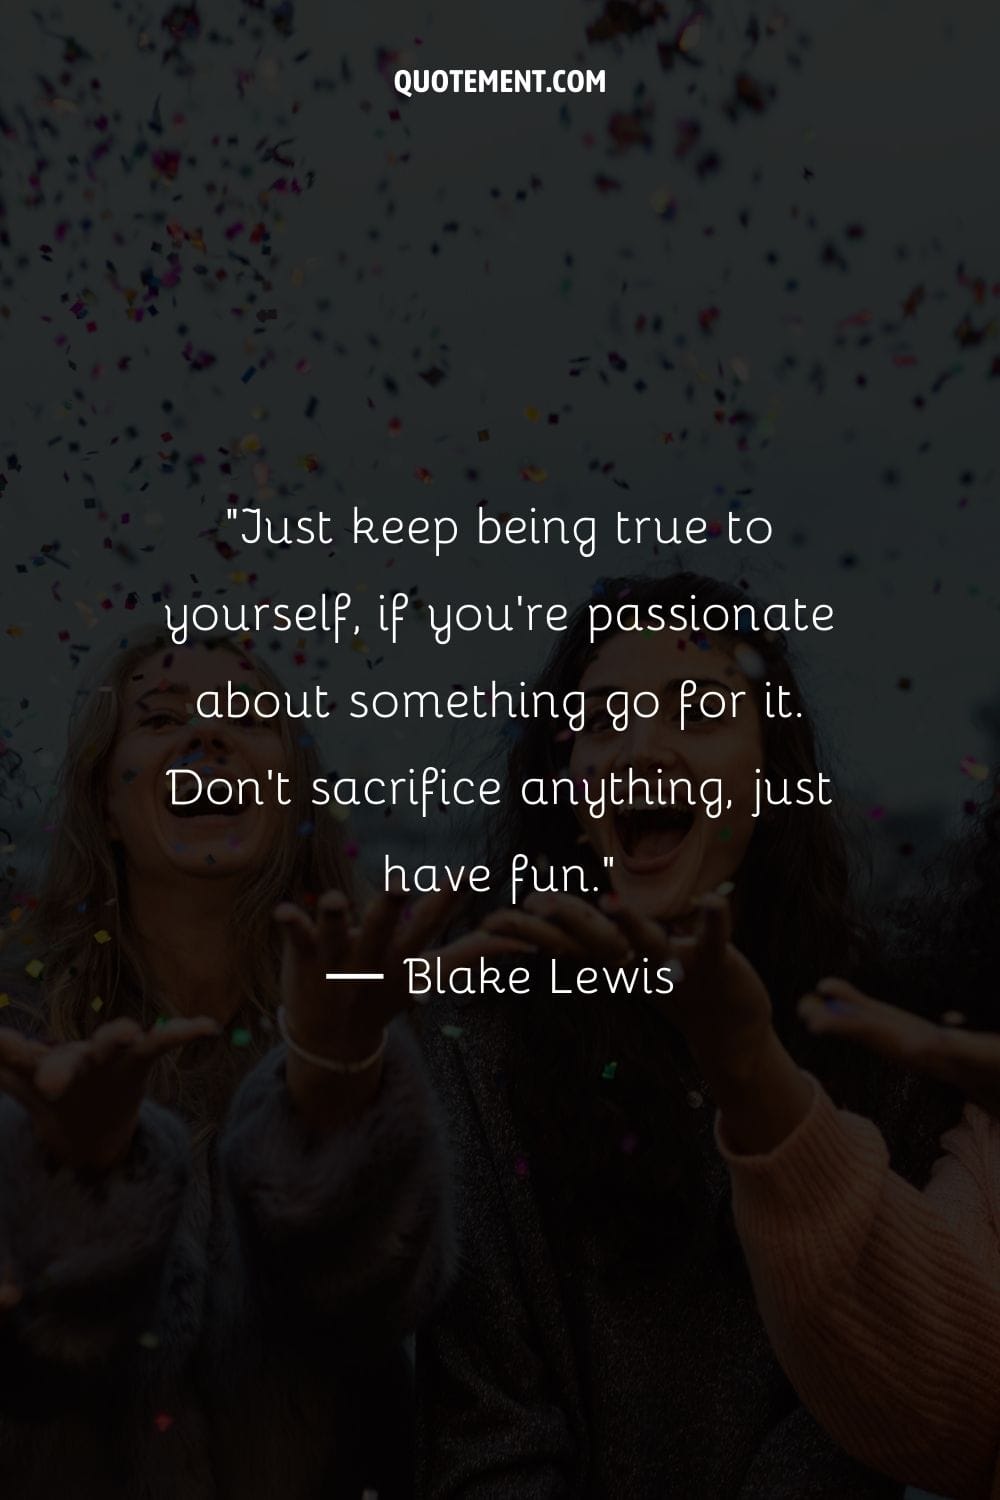 Just keep being true to yourself, if you're passionate about something go for it. Don't sacrifice anything, just have fun